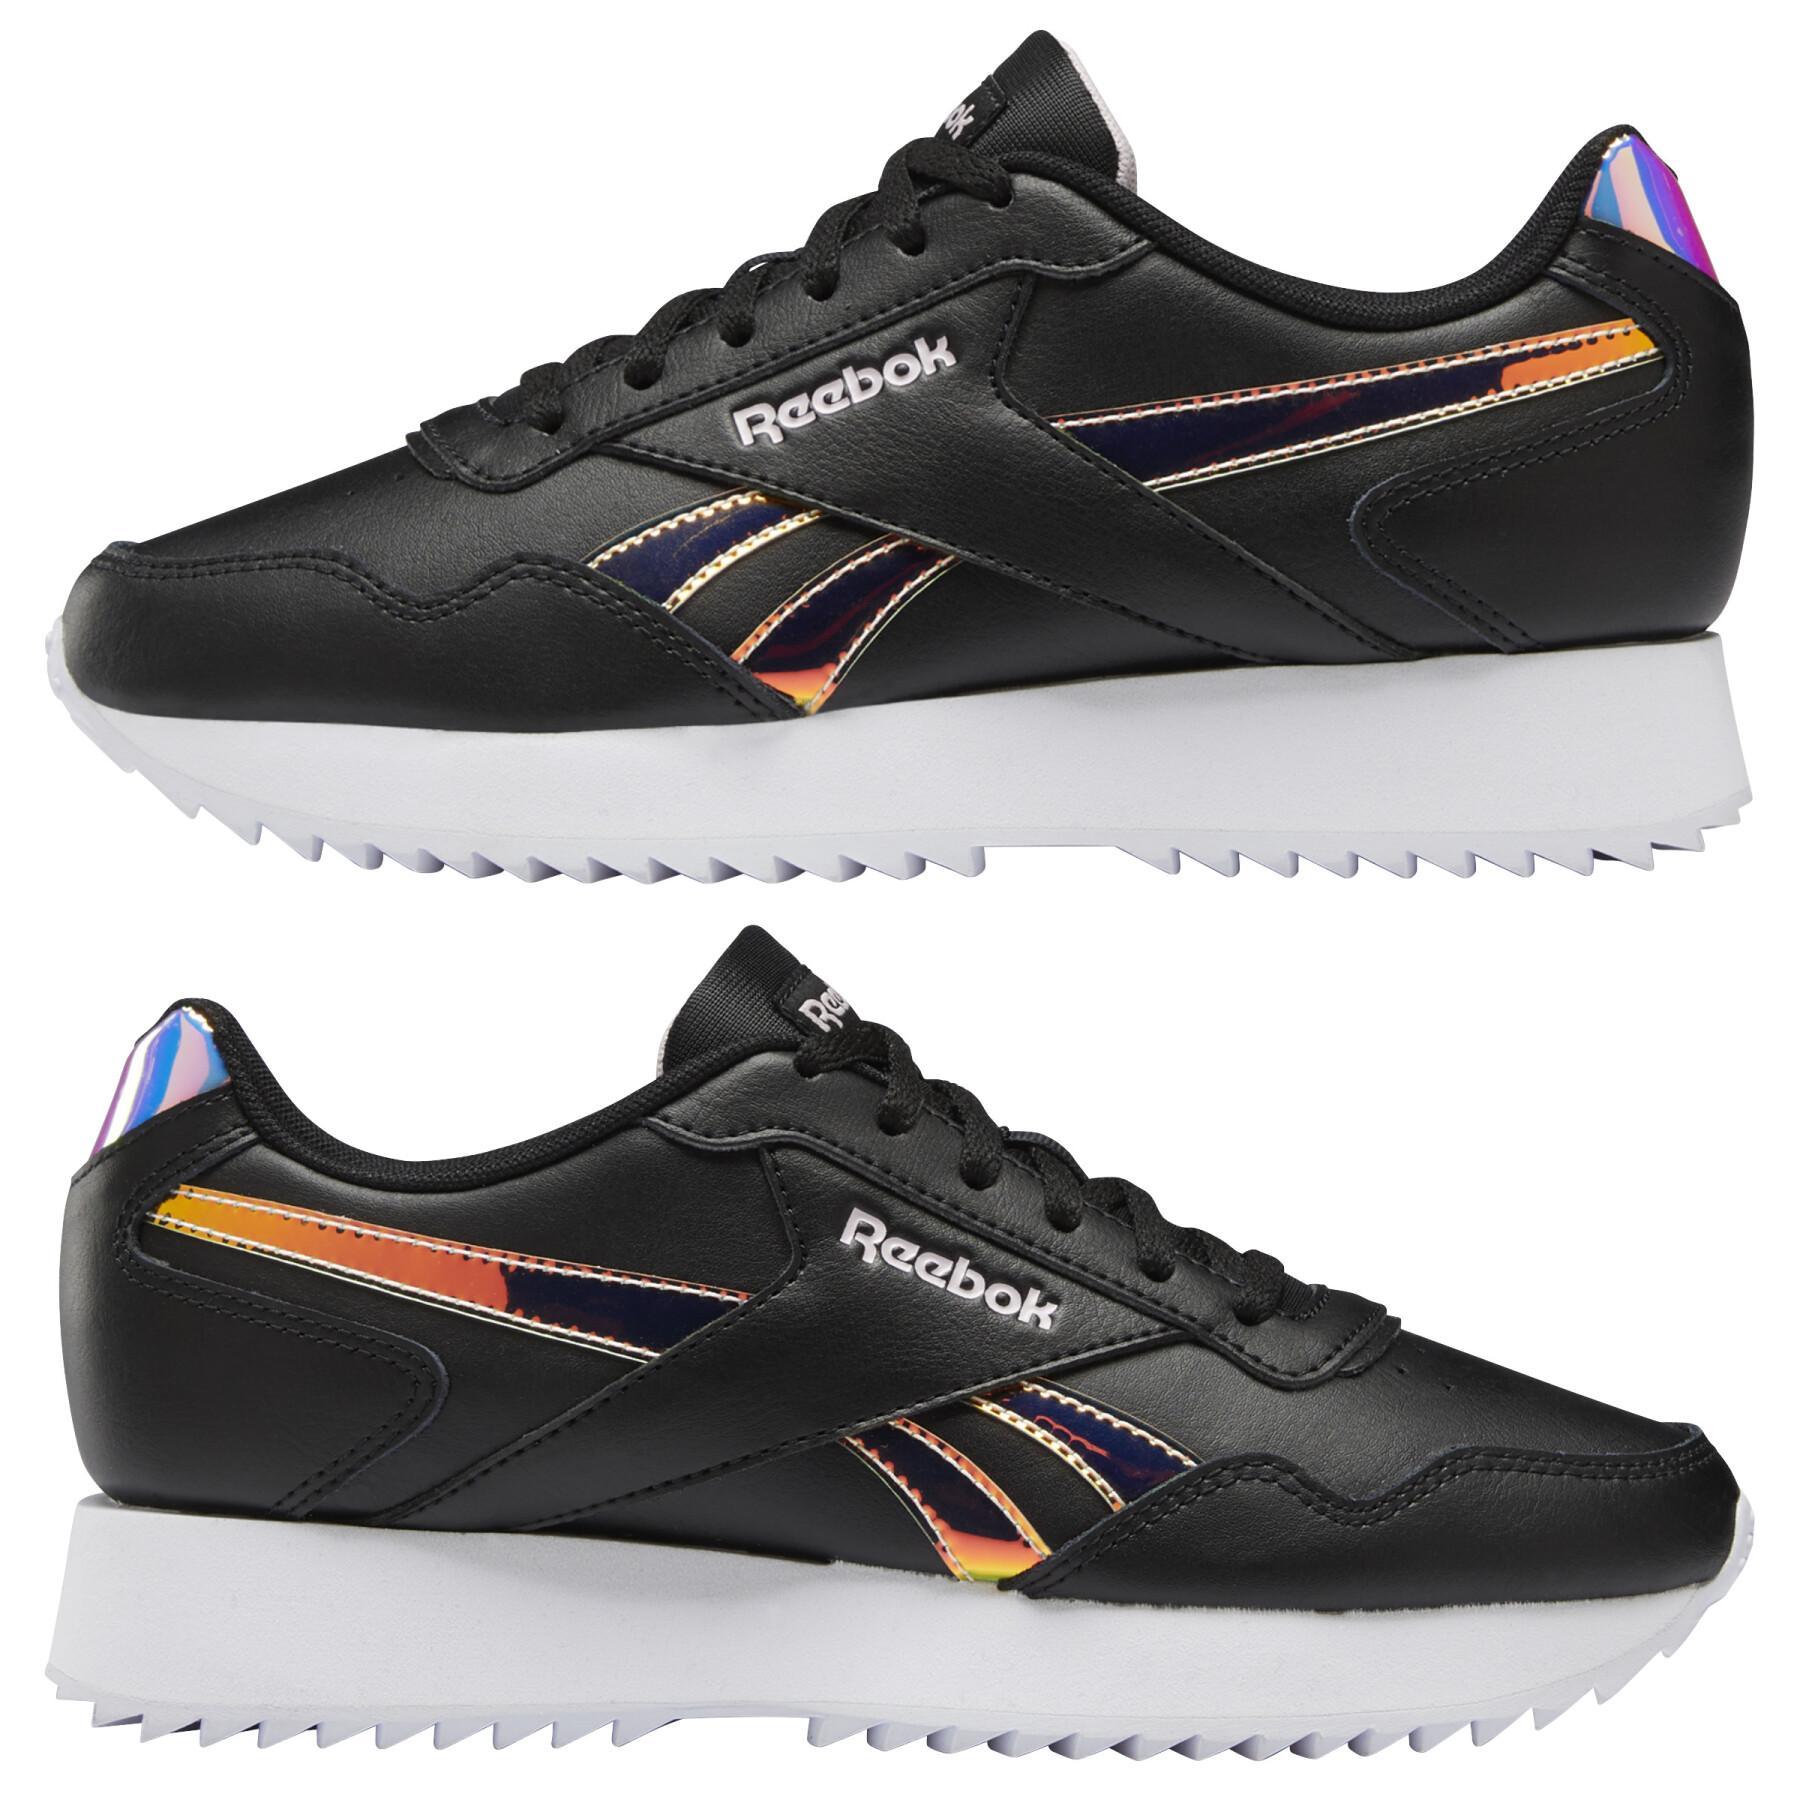 Chaussures femme Reebok Royal Glide Ripple Double